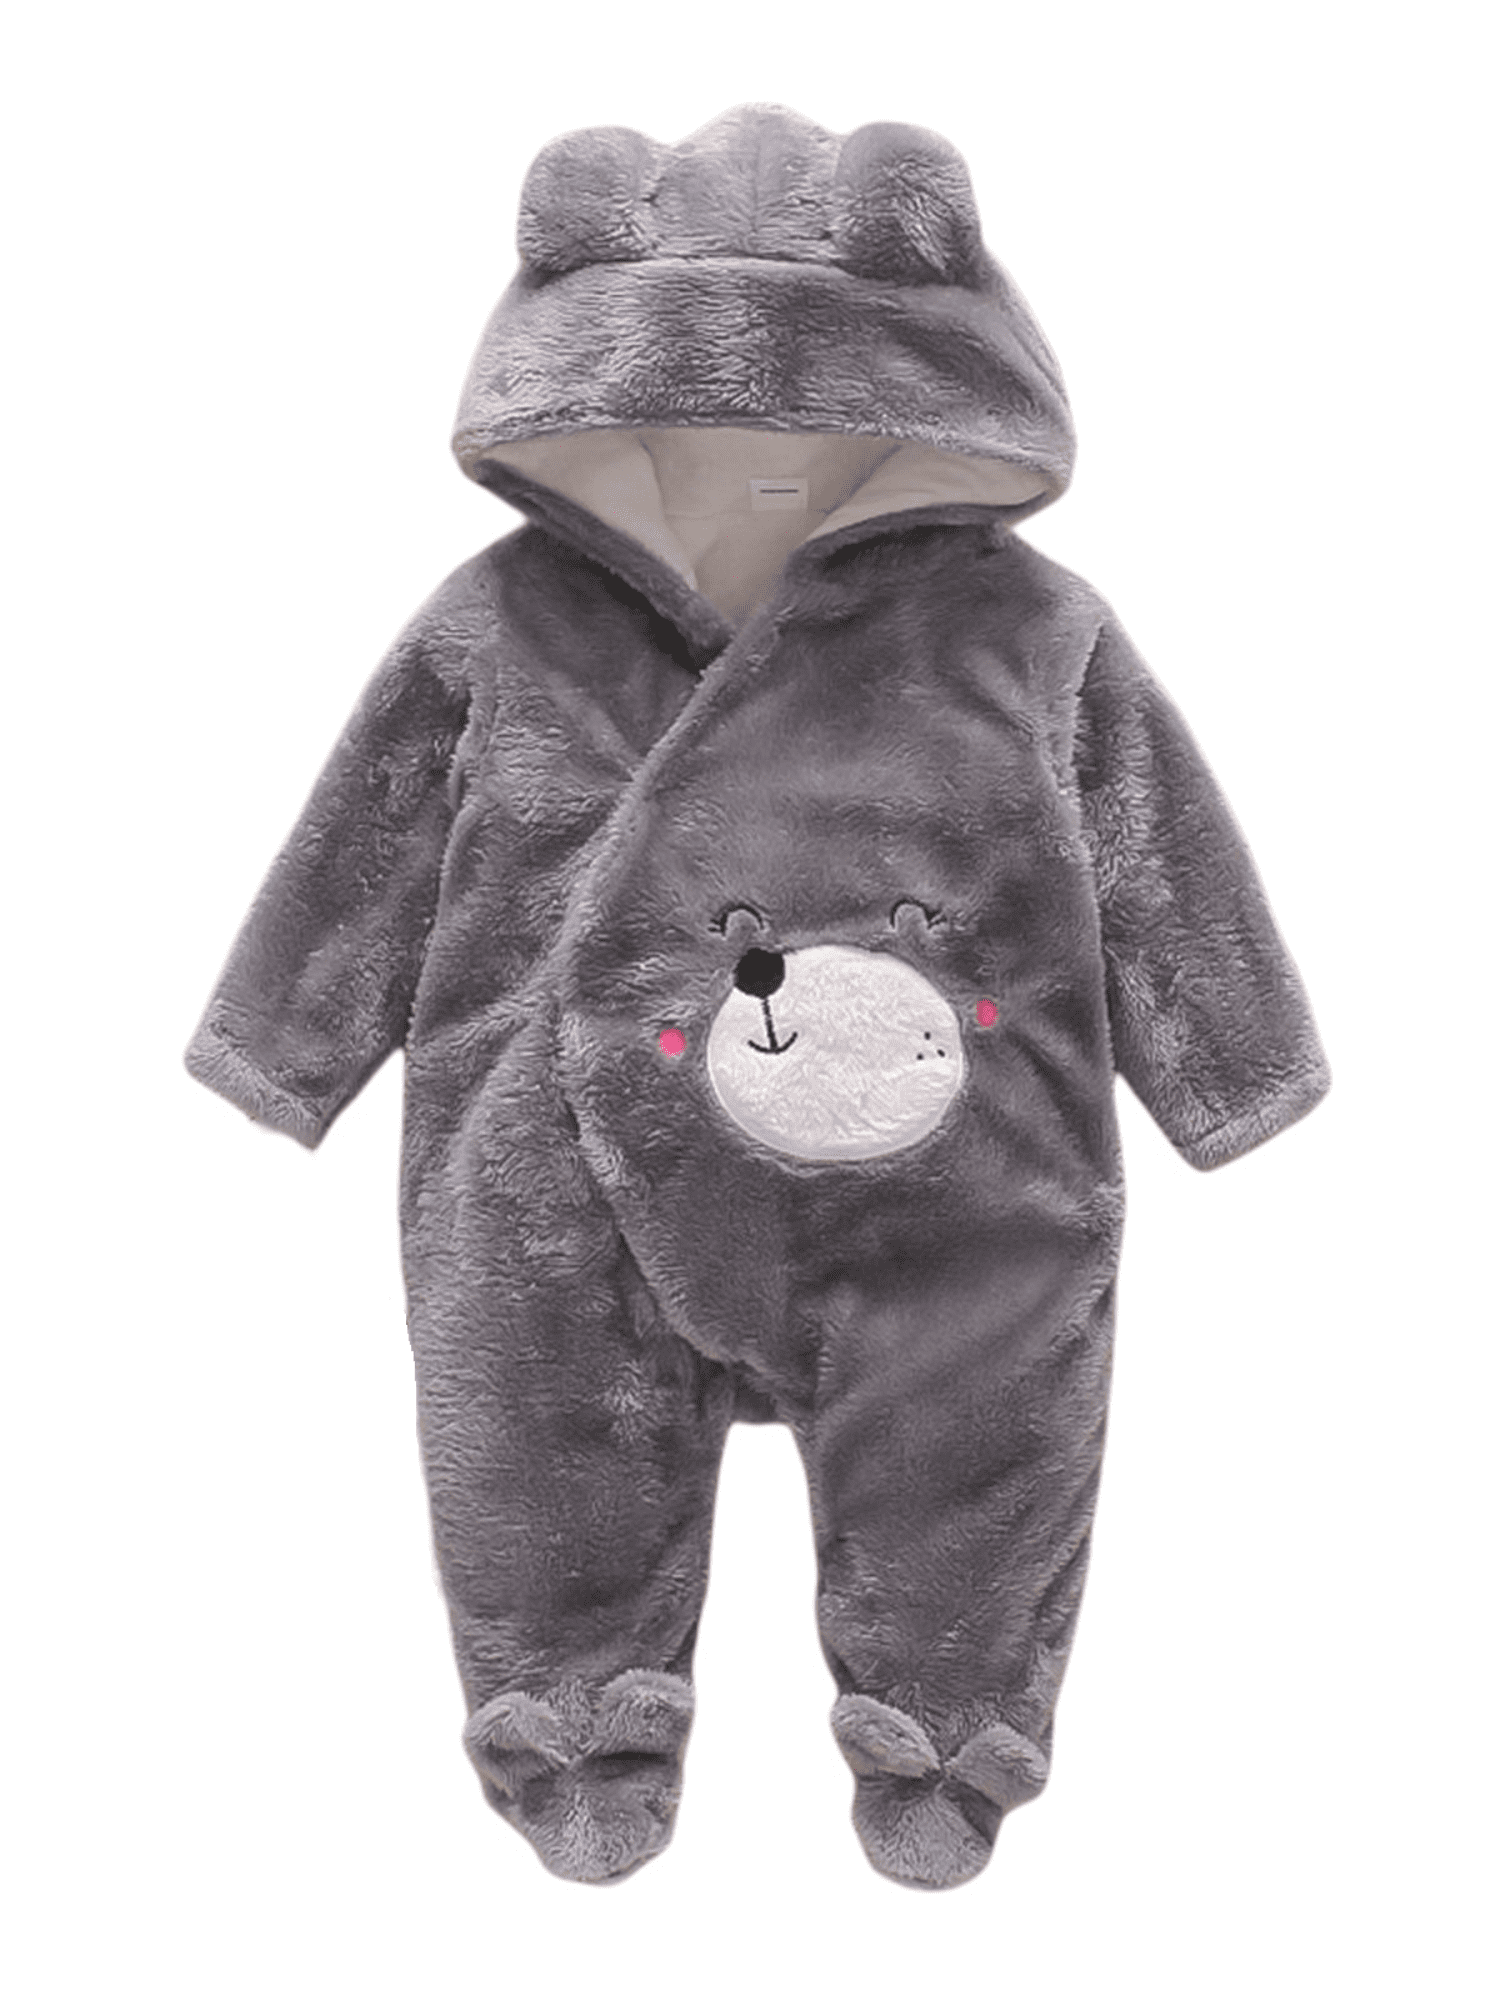 PatPat Baby Unisex Footed Fleece Jumpsuit Hooded Romper,Infant Baby ...